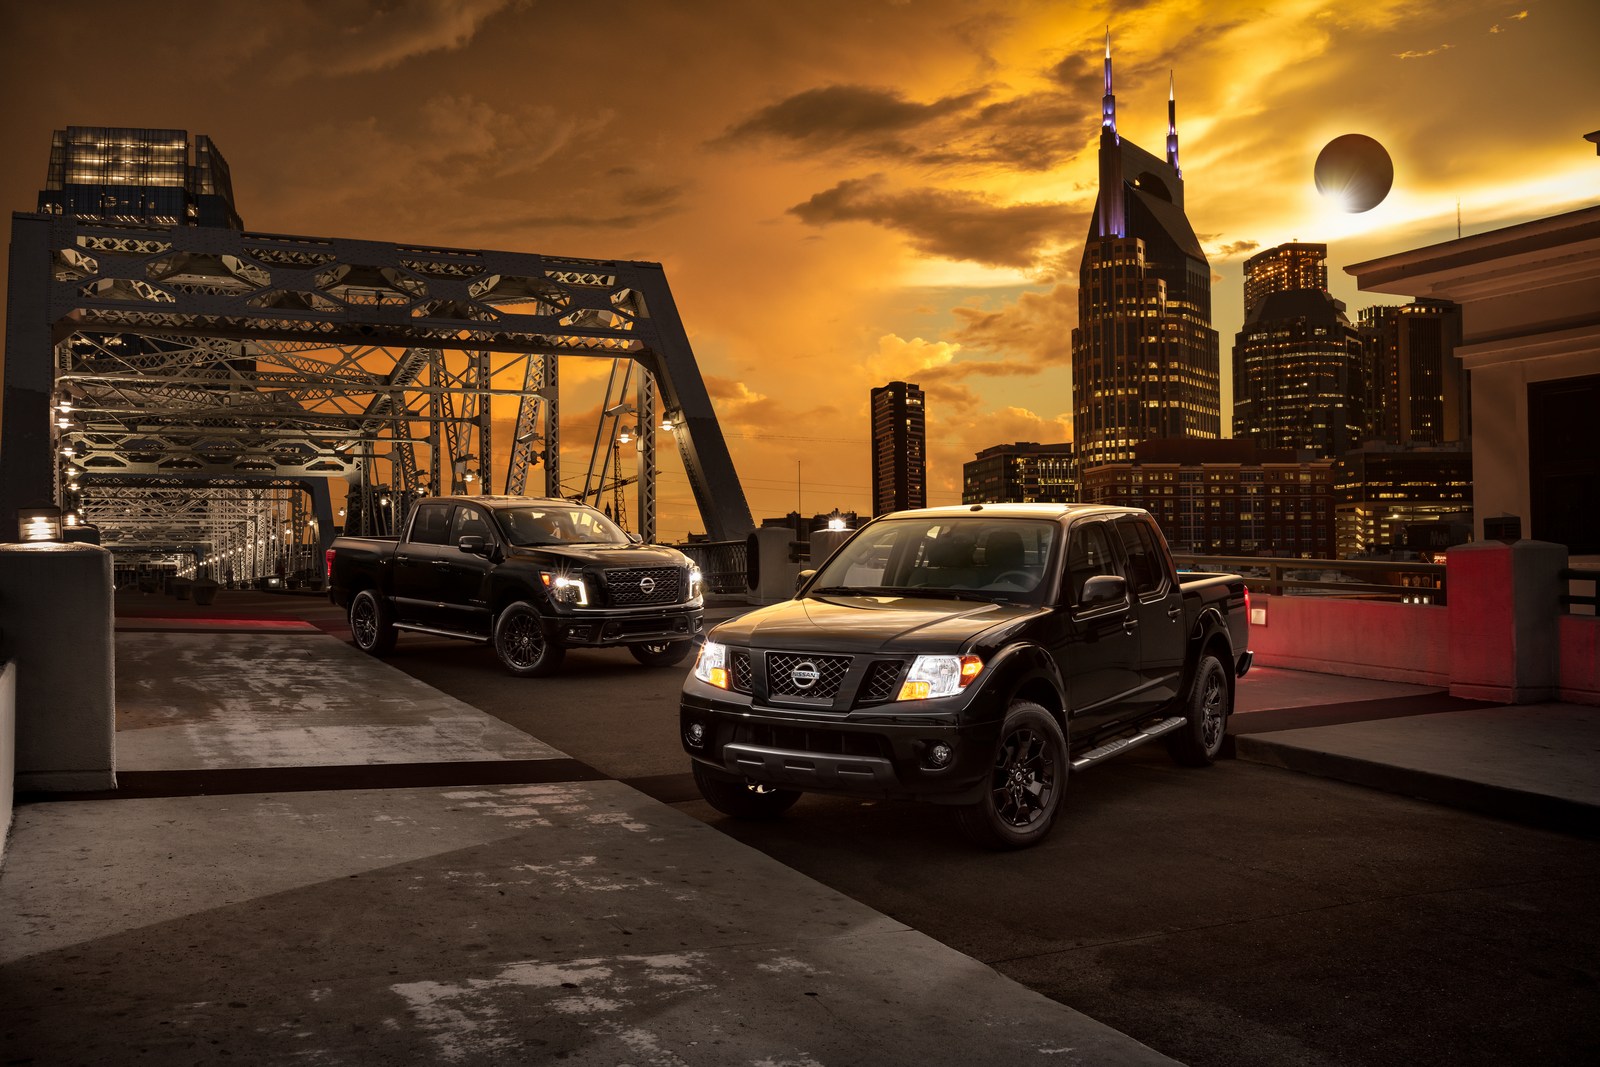 As the solar eclipse darkened the midday sky over NissanÕs U.S. headquarters in Franklin, Tenn., the company rolled out three new additions to its popular and hot selling portfolio of custom Midnight Edition models: TITAN, TITAN XD and Frontier Midnight Editions. NissanÕs Midnight Editions sell on average two times faster than standard models.